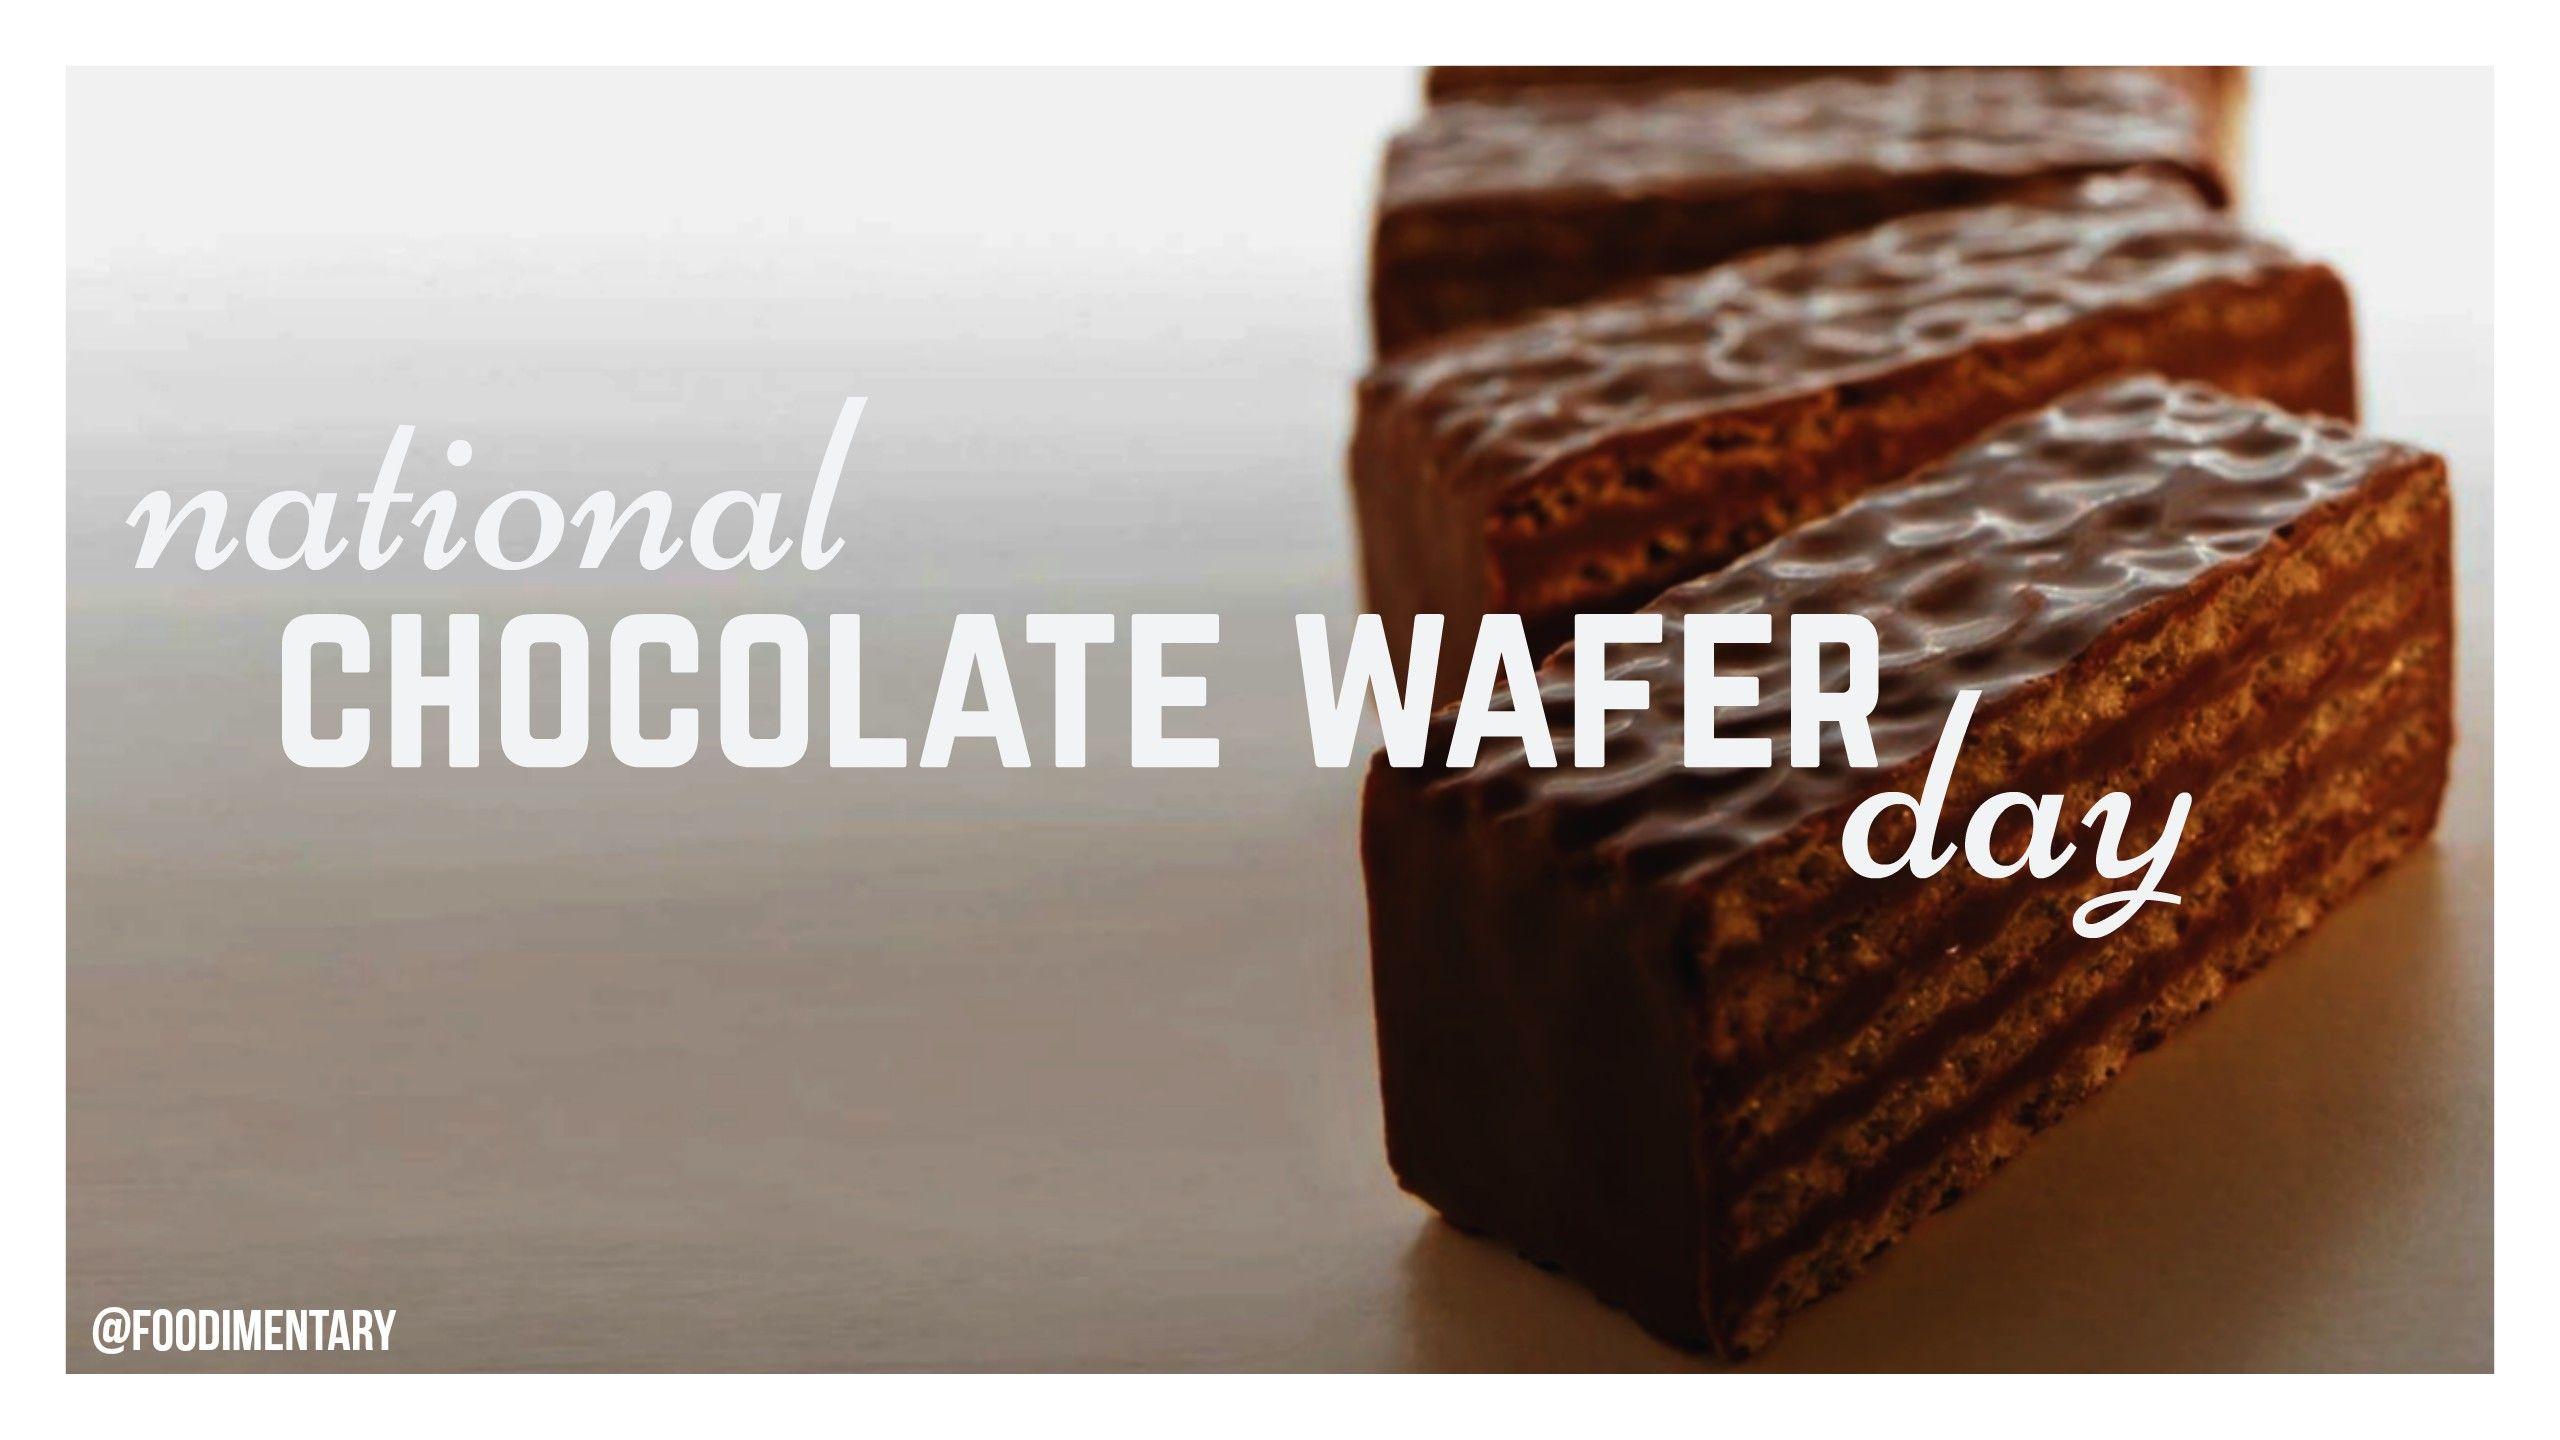 July 3rd is National Chocolate Wafer Day!. Foodimentary